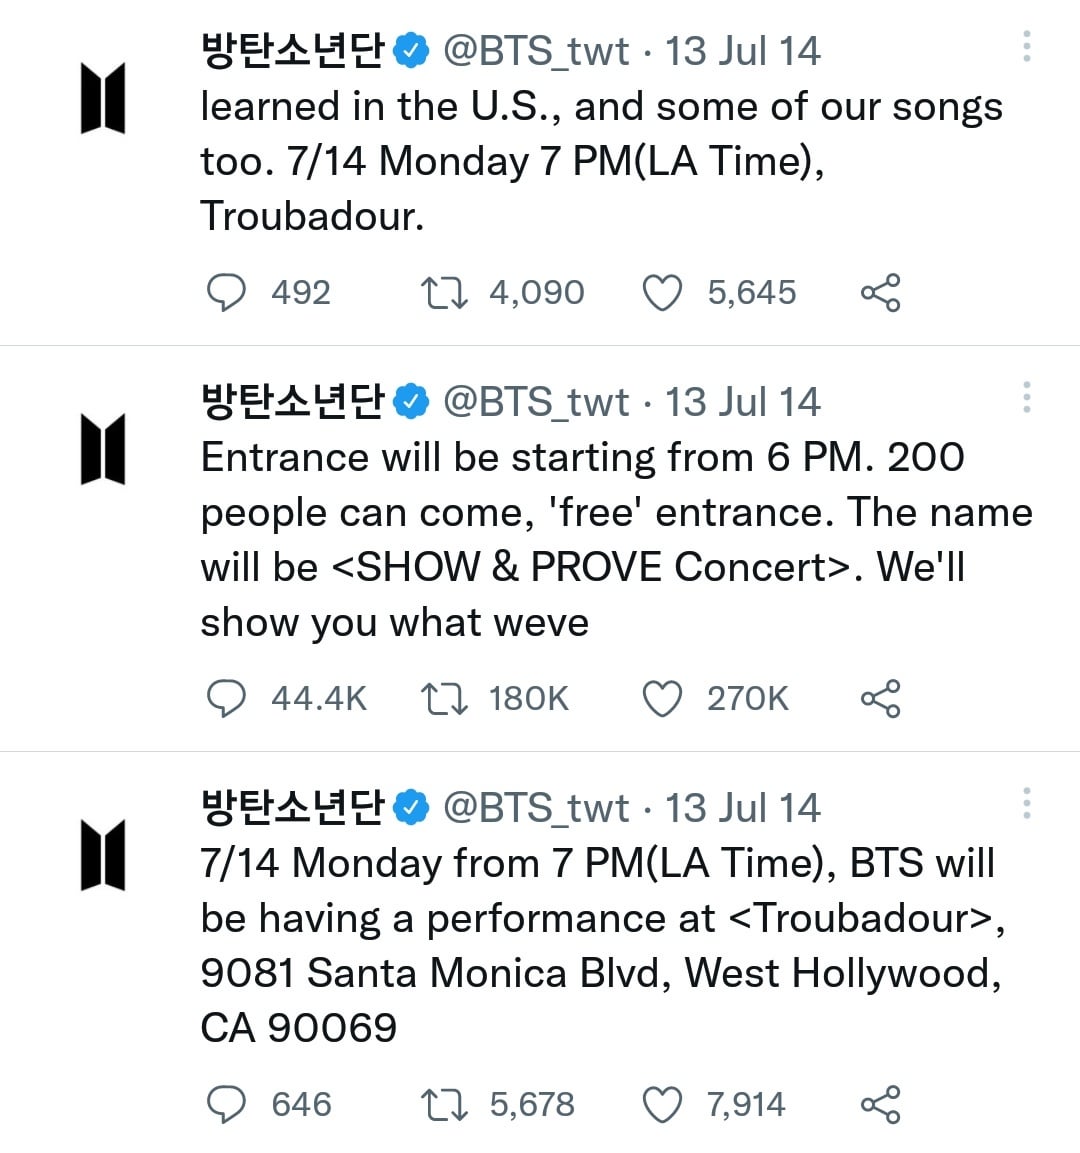 9 years ago today, BTS announced their first showcase stage in the US, the "Show & Prove" concert at Troubadour, West Hollywood, to be held on Mon 14 Jul 2014